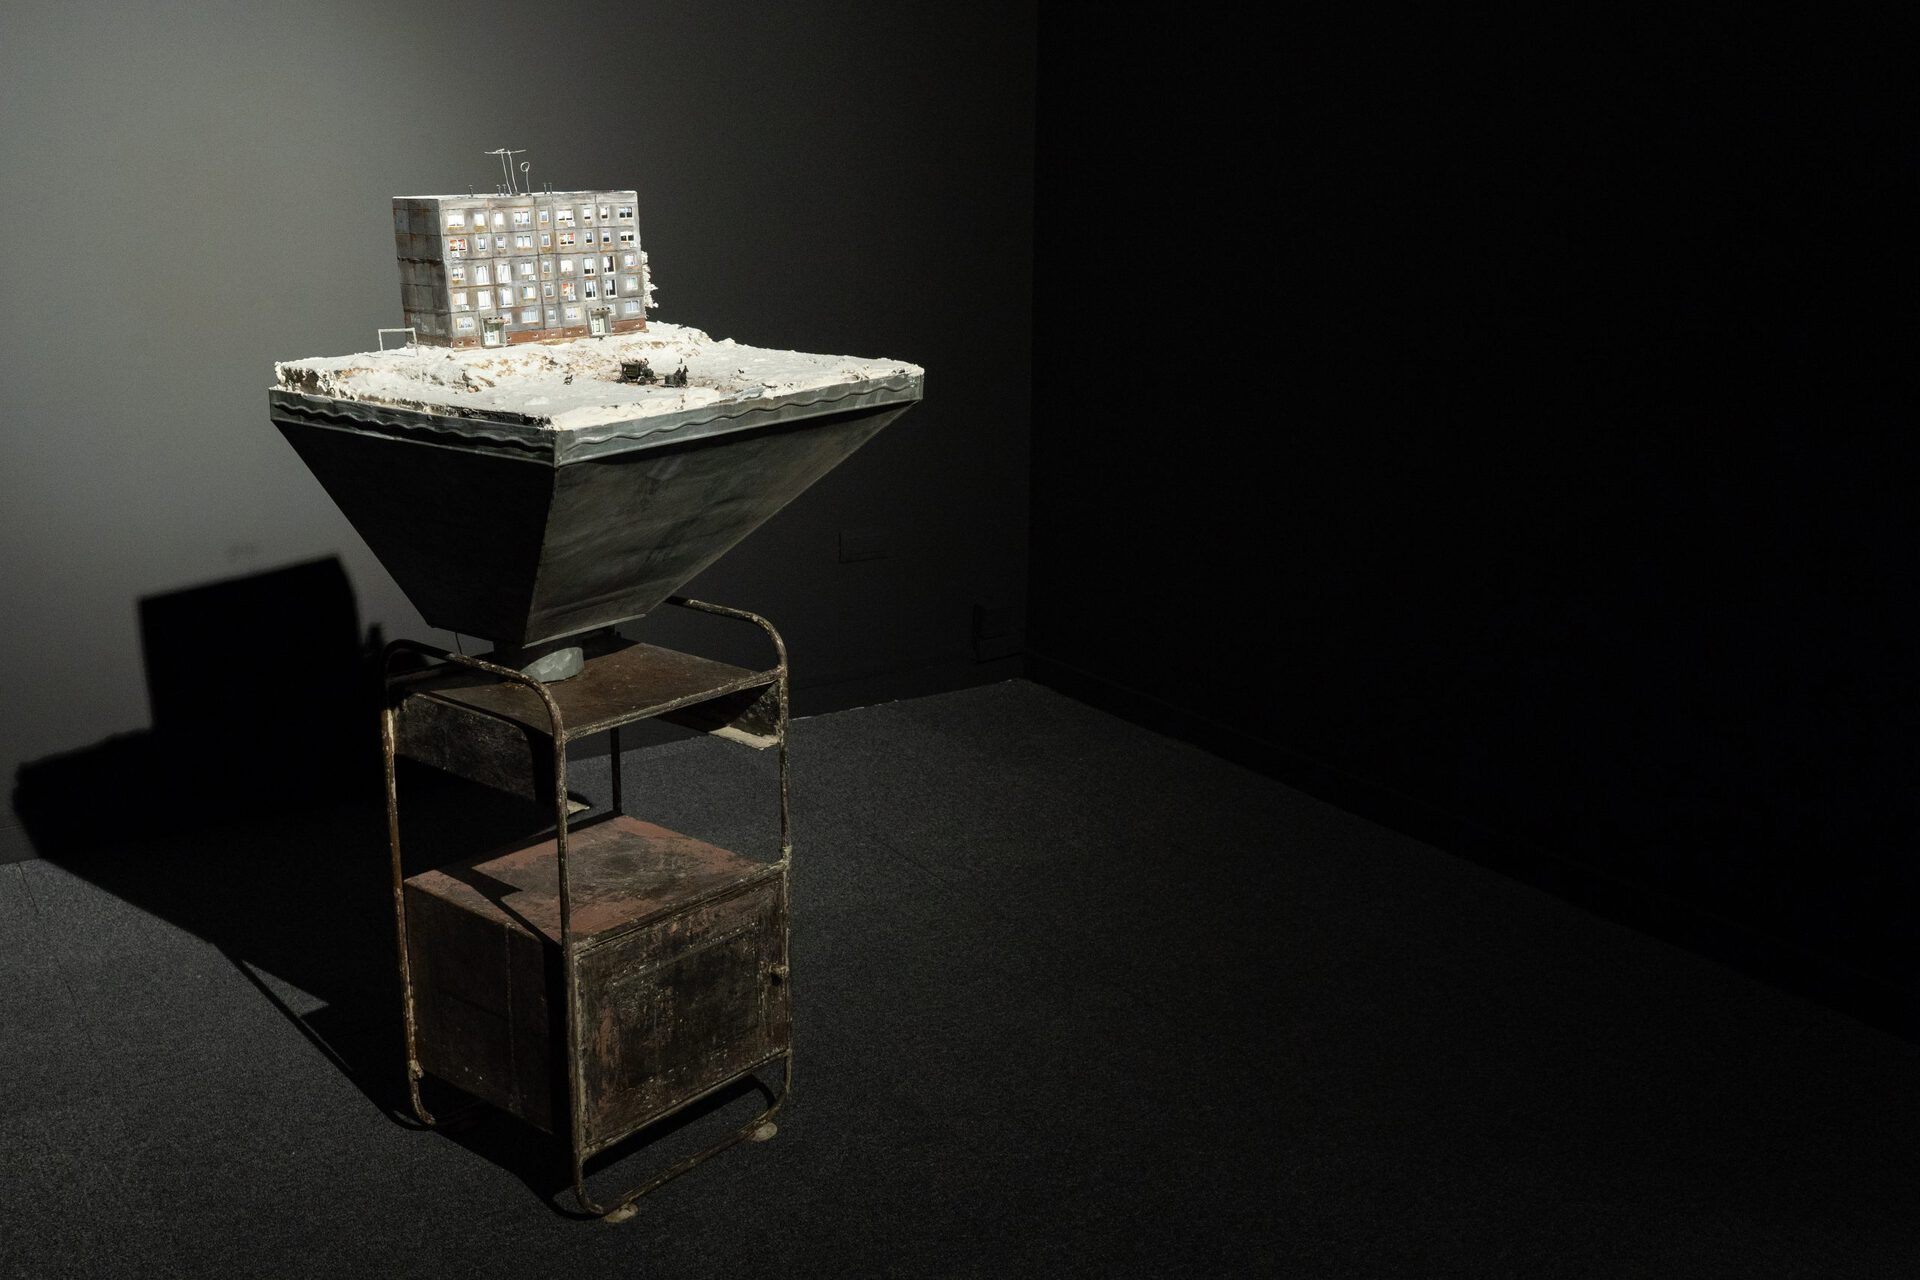 Exhibition view. Michele Bressan, Like in One of My Dreams #0, table and scale model, 2020, 100 x 50 cm. Photo credit: infi.ro